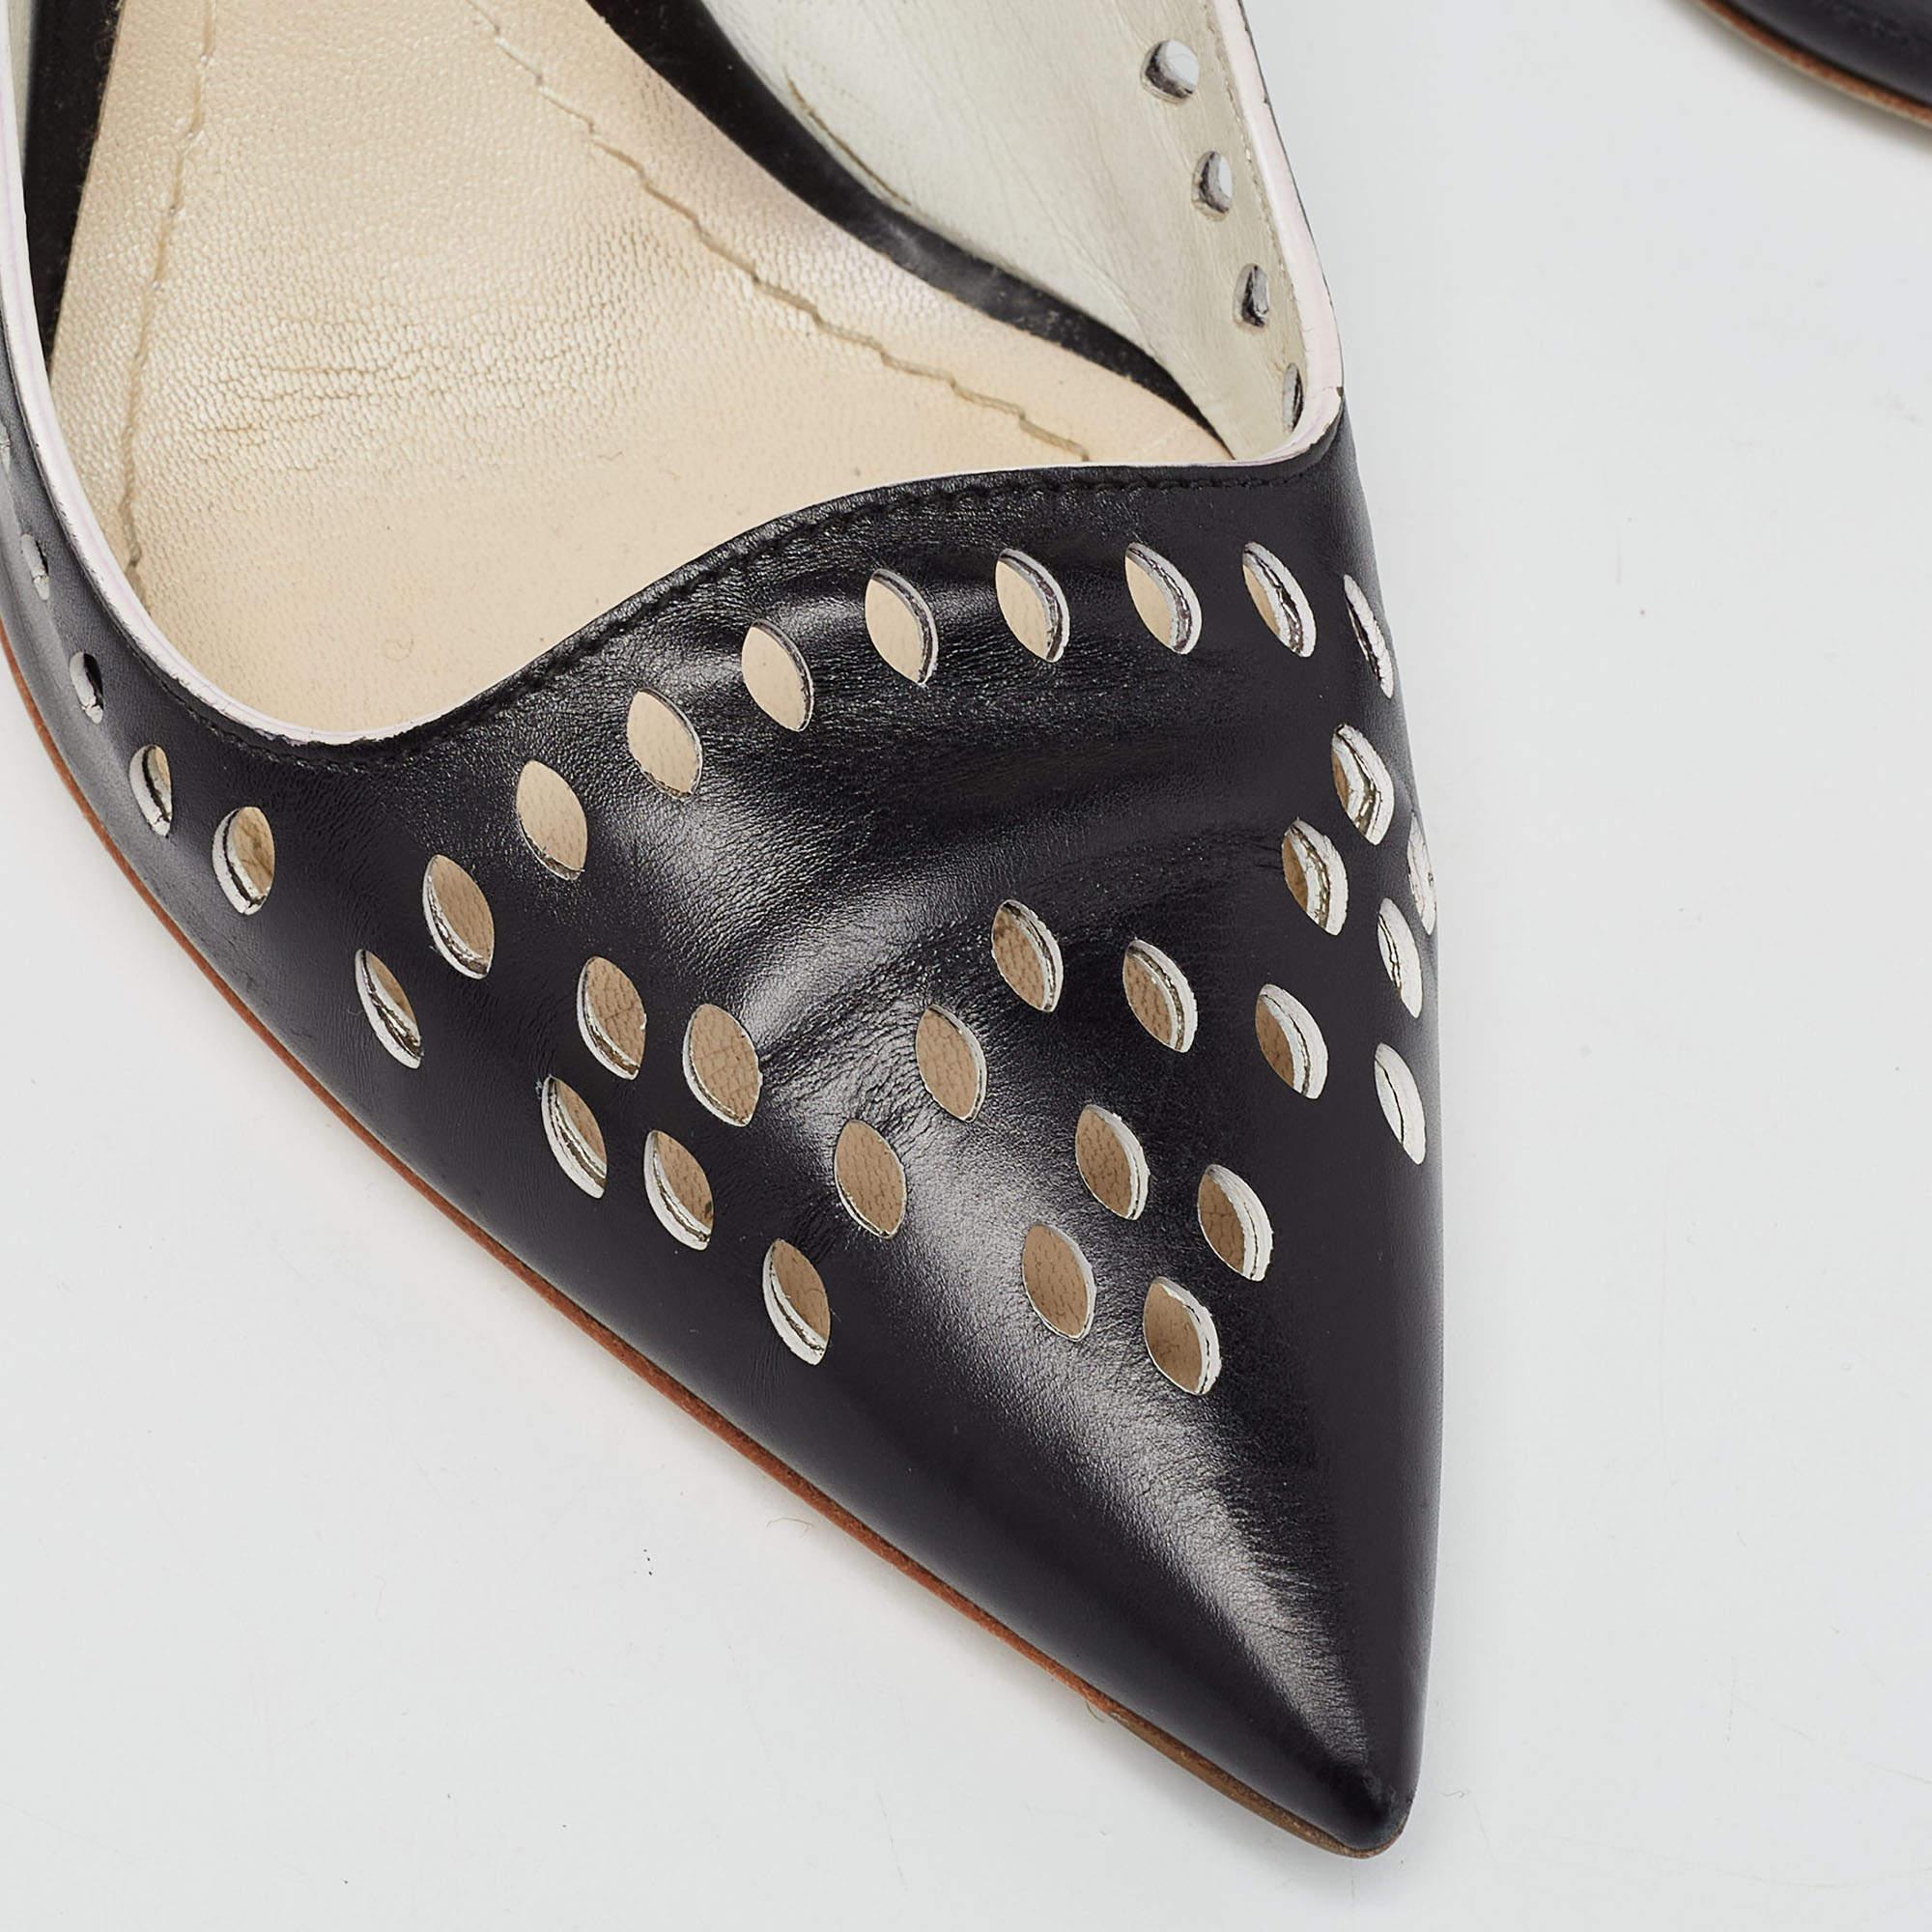 Dior Black Laser Cut Leather Pointed Toe Pumps Size 39.5 3